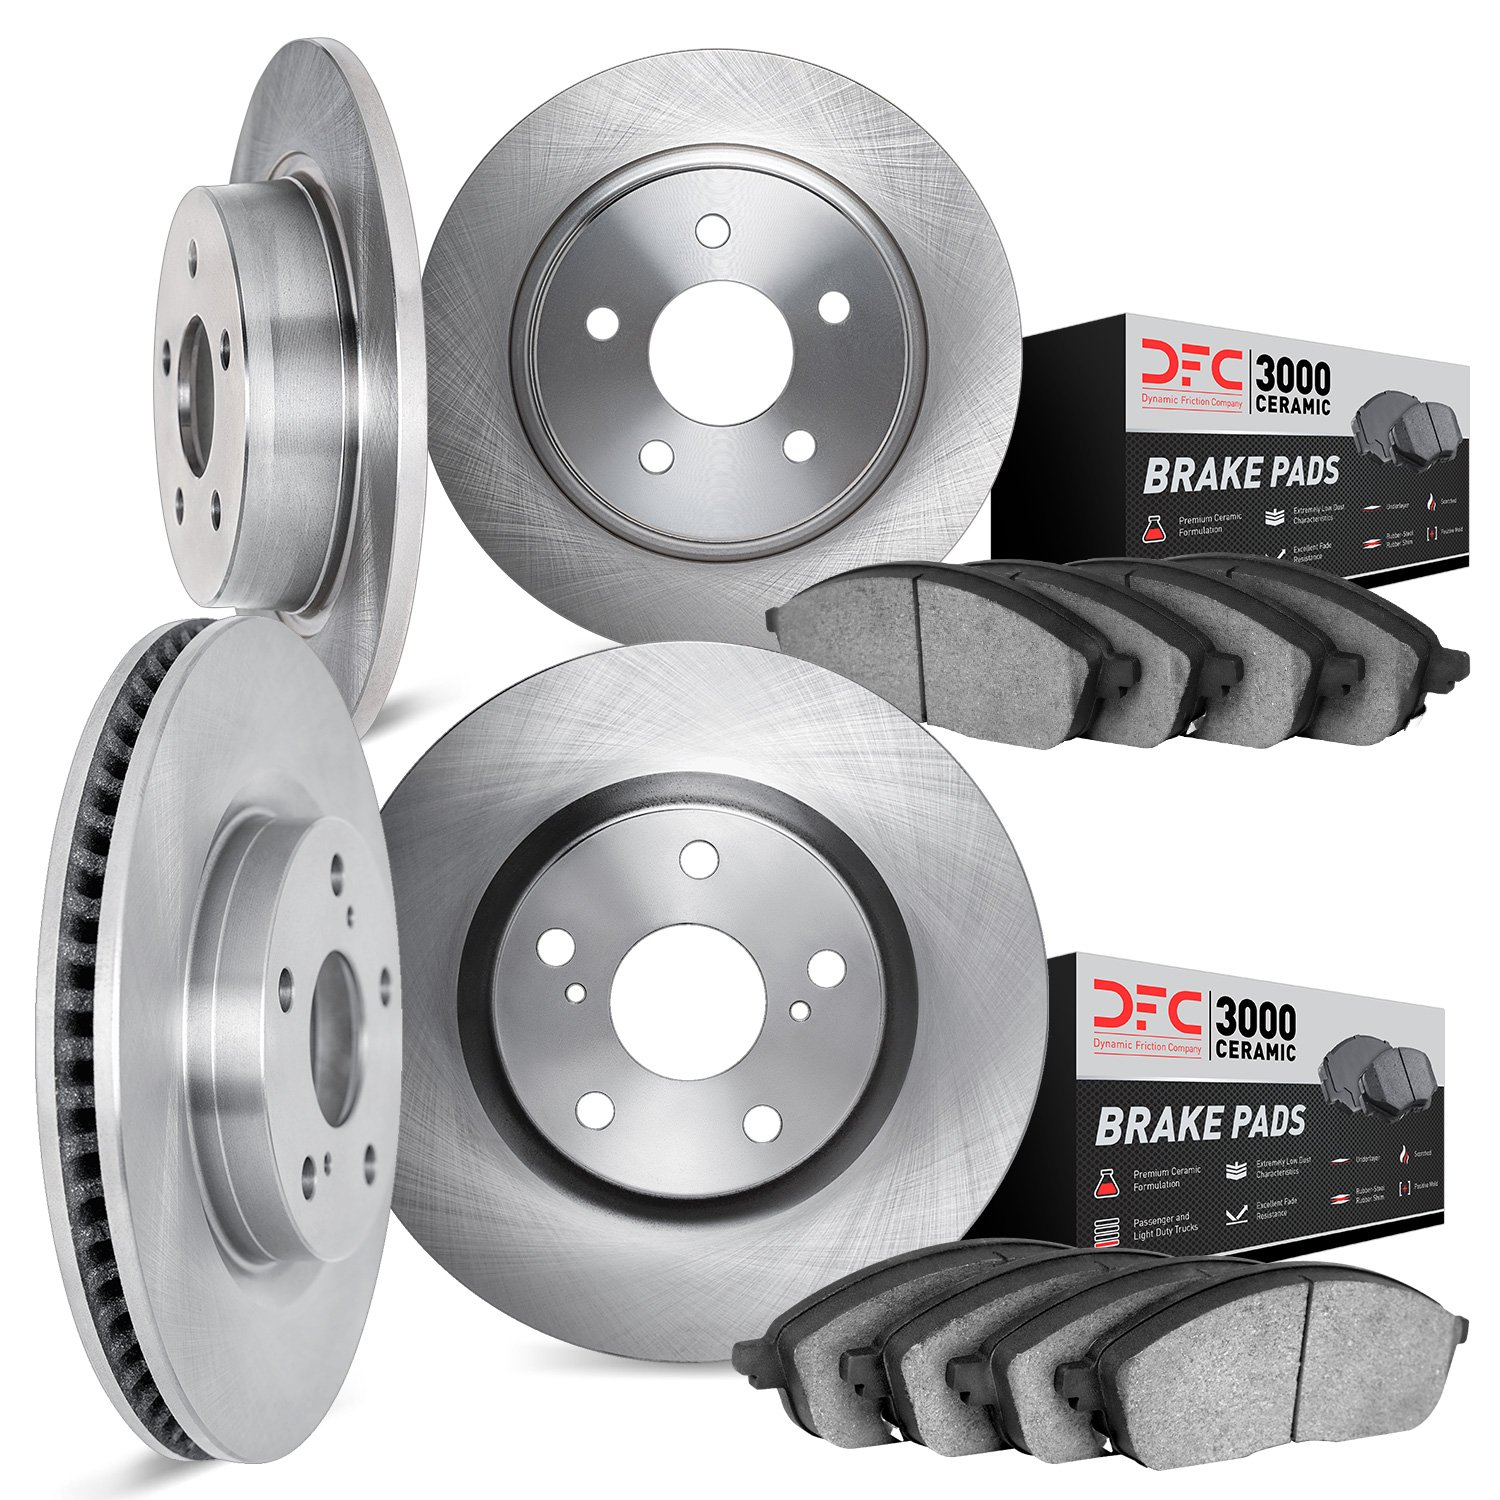 6304-76020 Brake Rotors with 3000-Series Ceramic Brake Pads Kit, 1990-1993 Lexus/Toyota/Scion, Position: Front and Rear